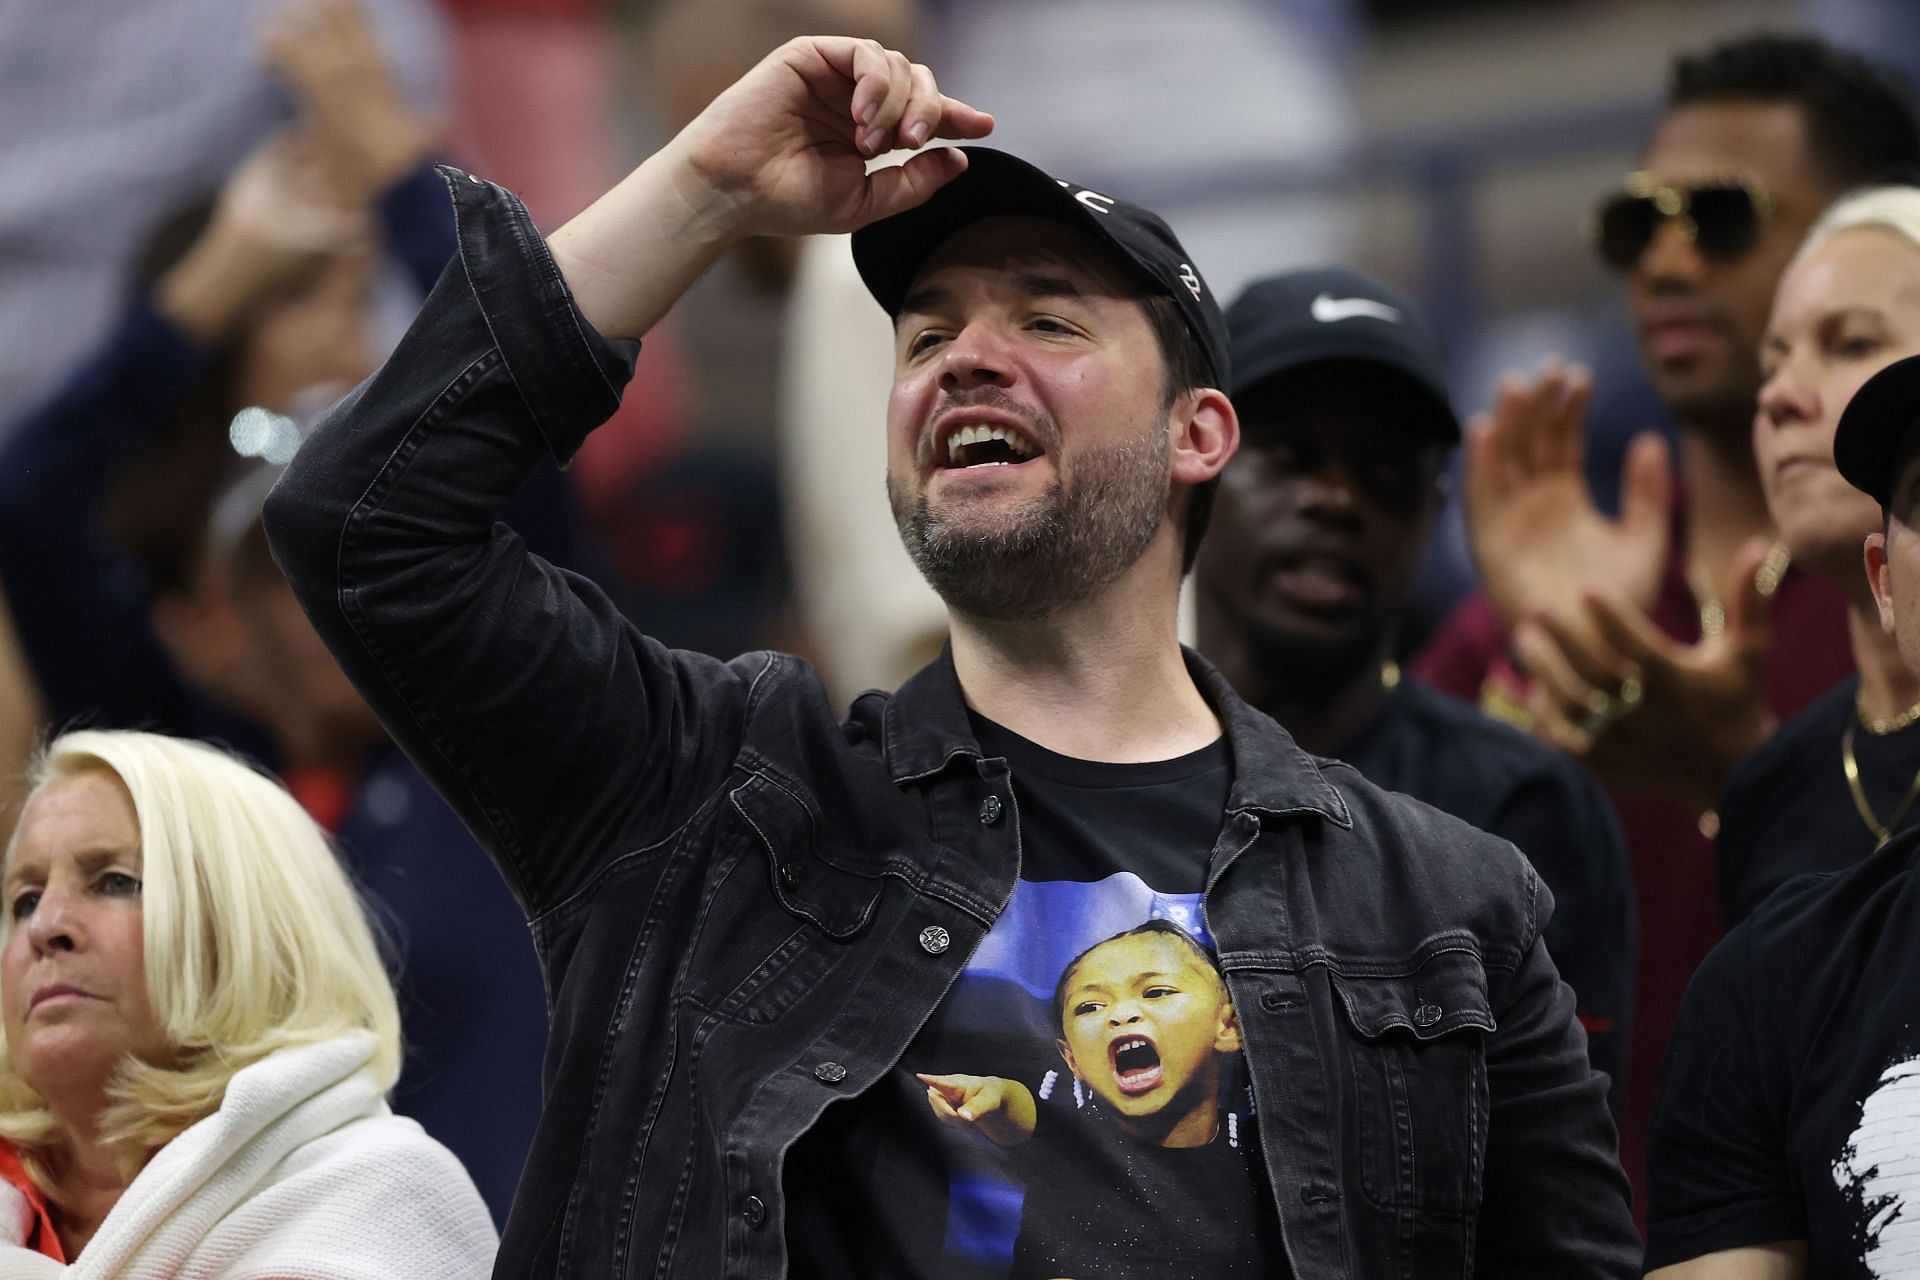 Alexis Ohanian cheering Serena Williams at the 2022 US Open